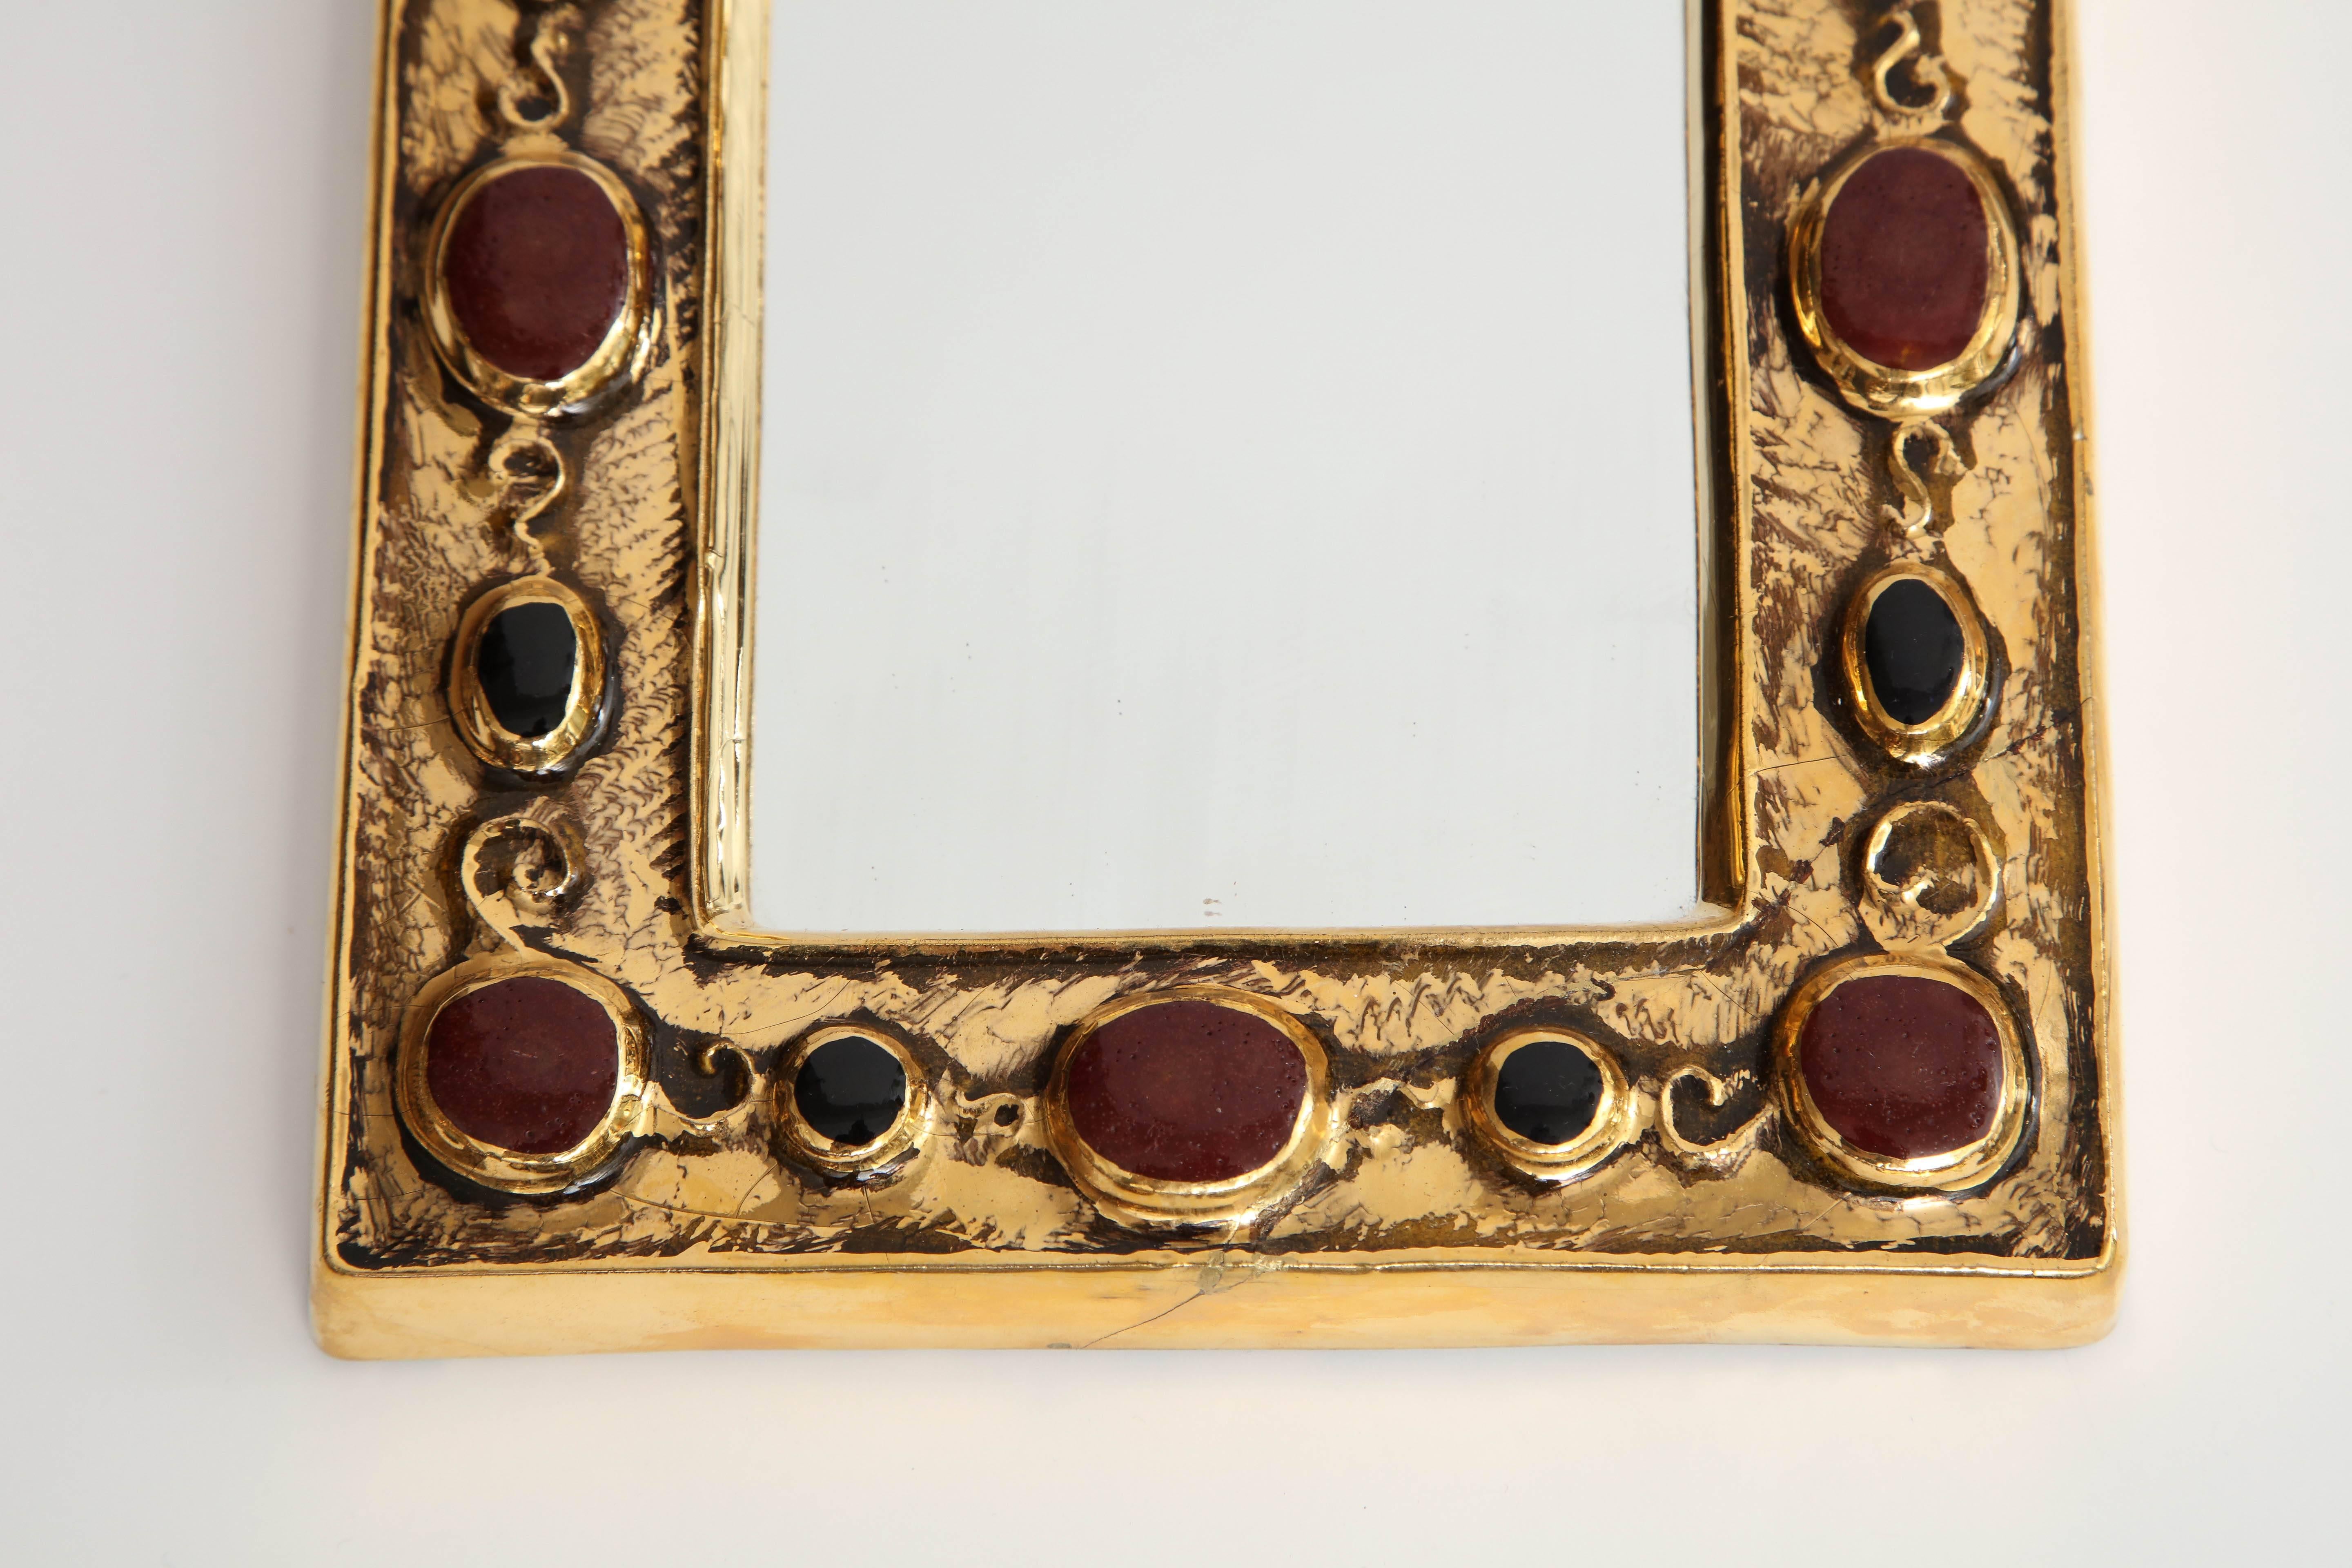 Jeweled François Lembo Mirror In Excellent Condition For Sale In New York, NY